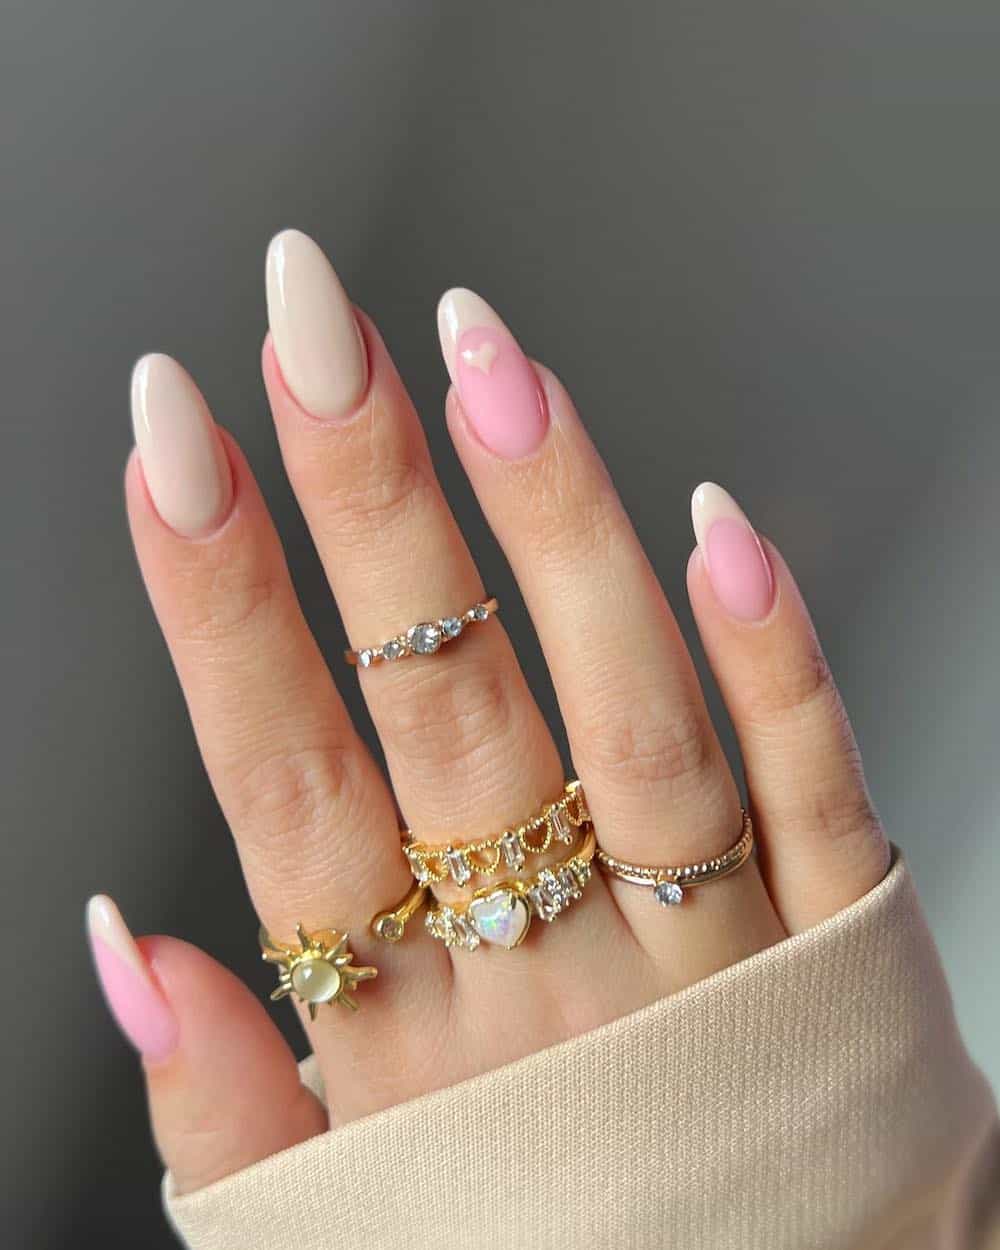 A hand with long almond nails painted with a soft beige featuring solid-colored nails, French tips, and heart details